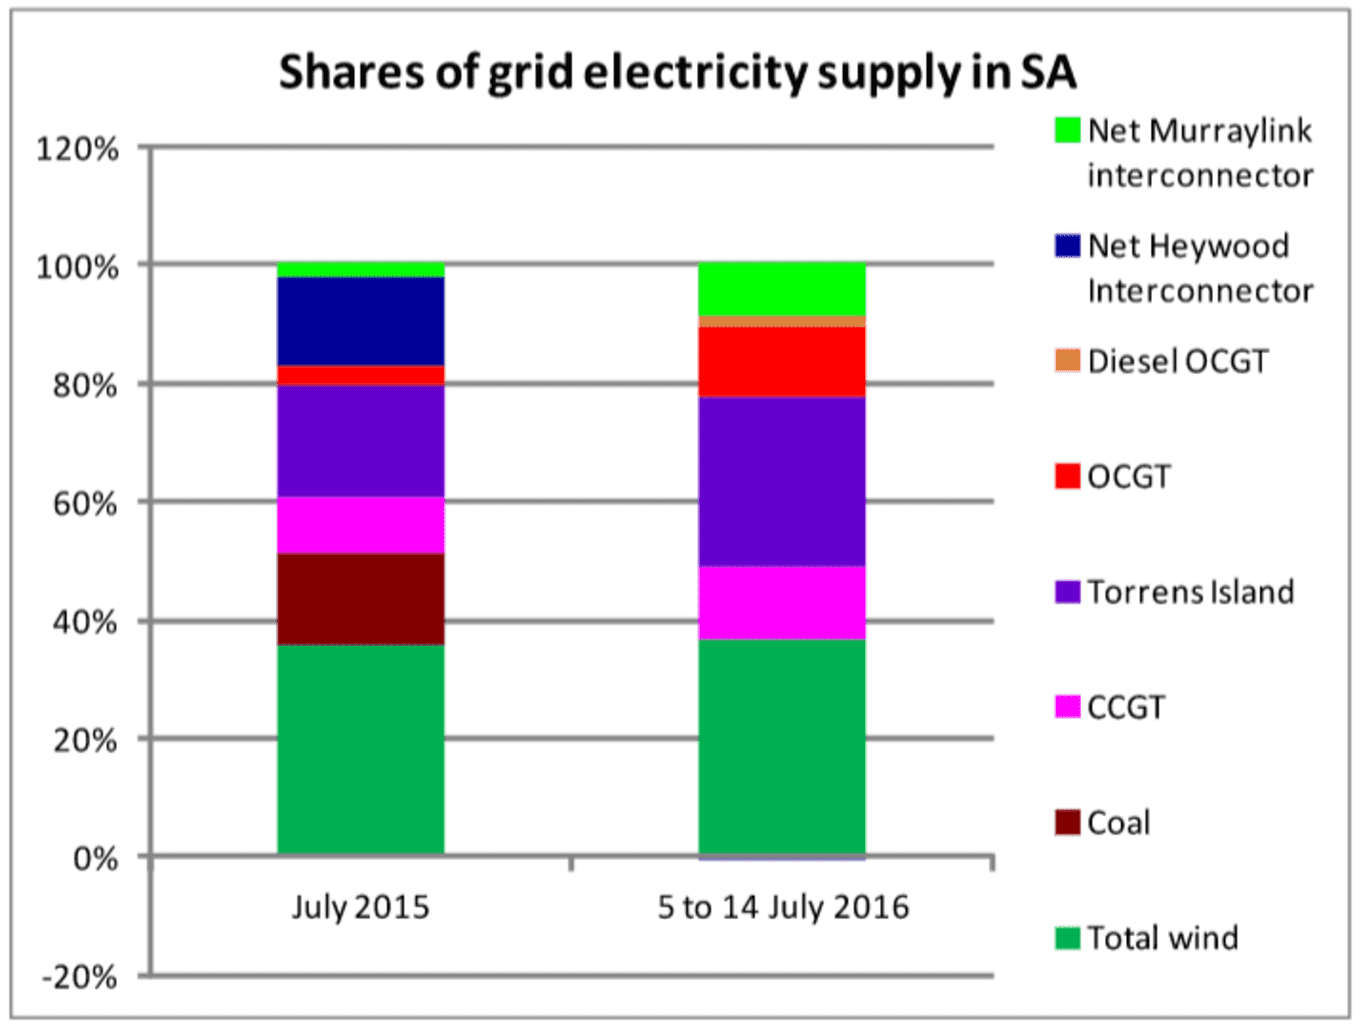 Shares of grid electricity supply in SA